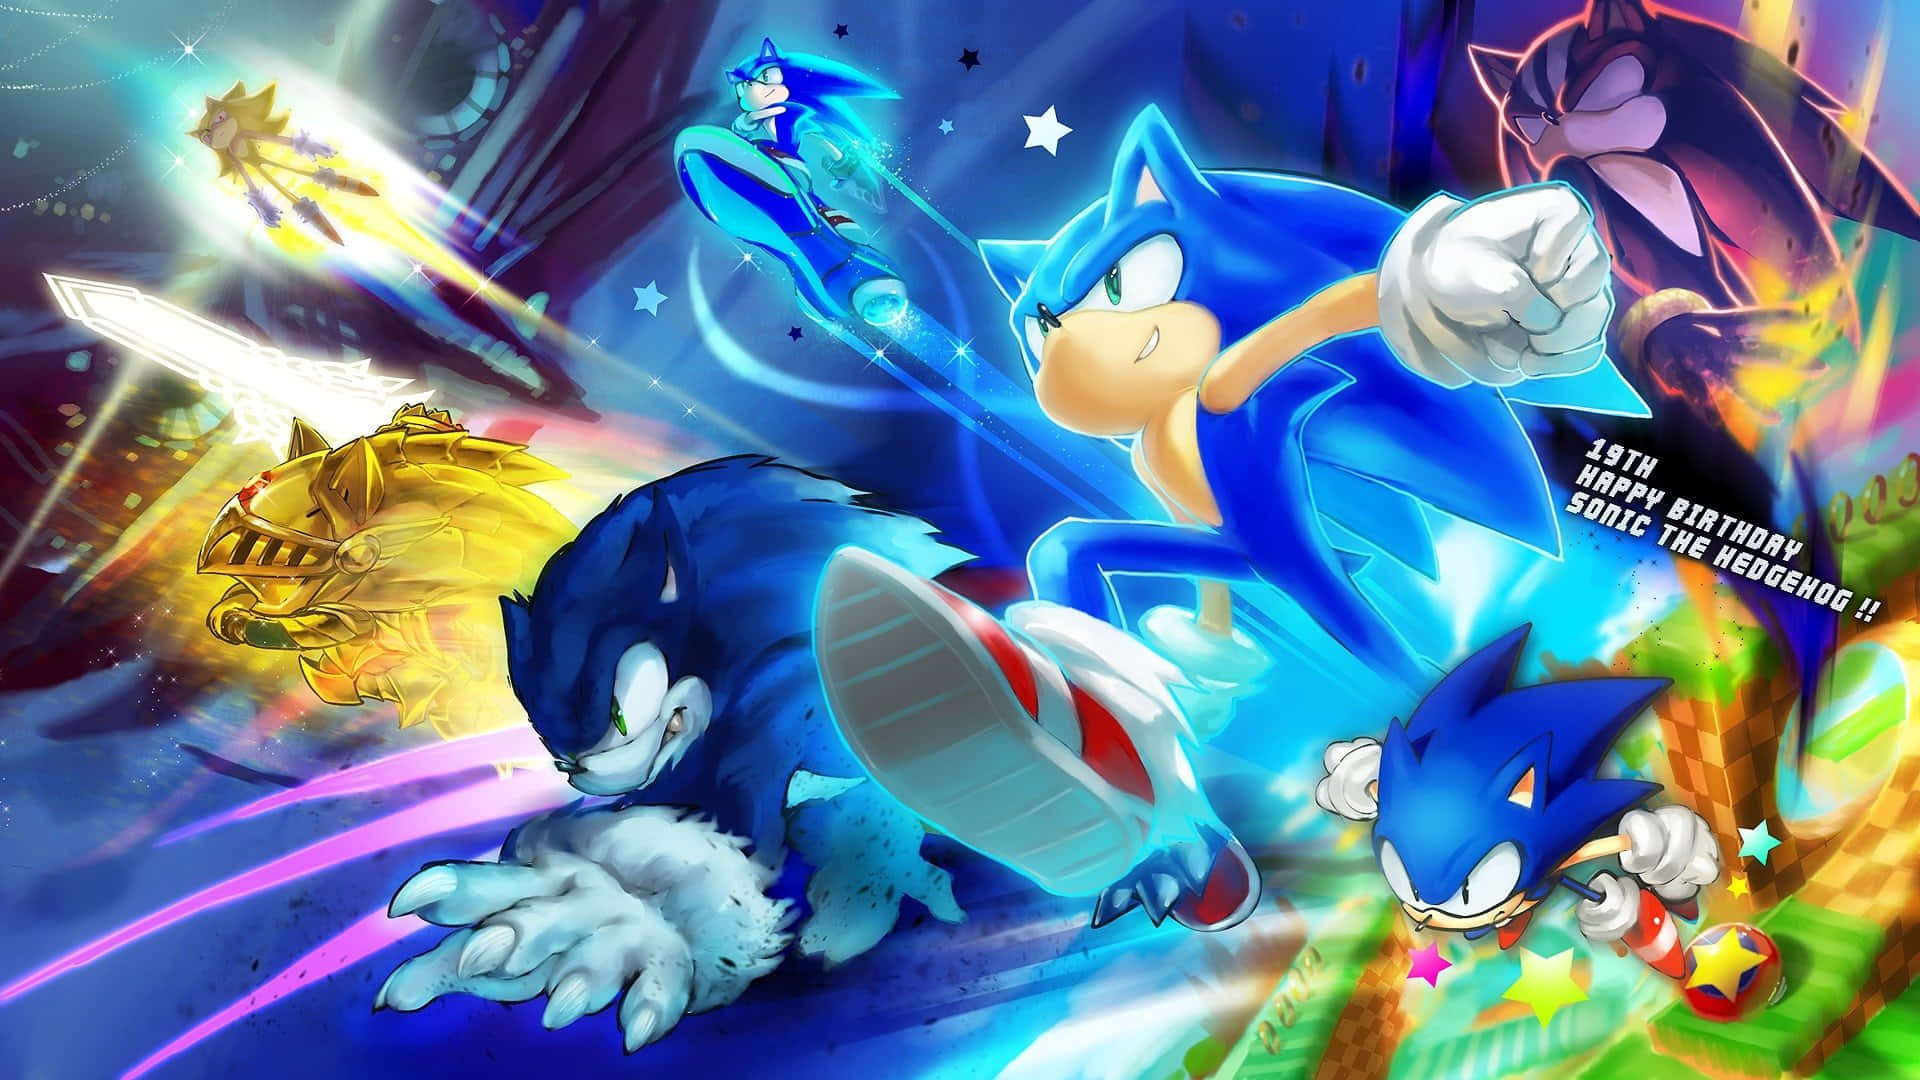 Sonic The Hedgehog Background